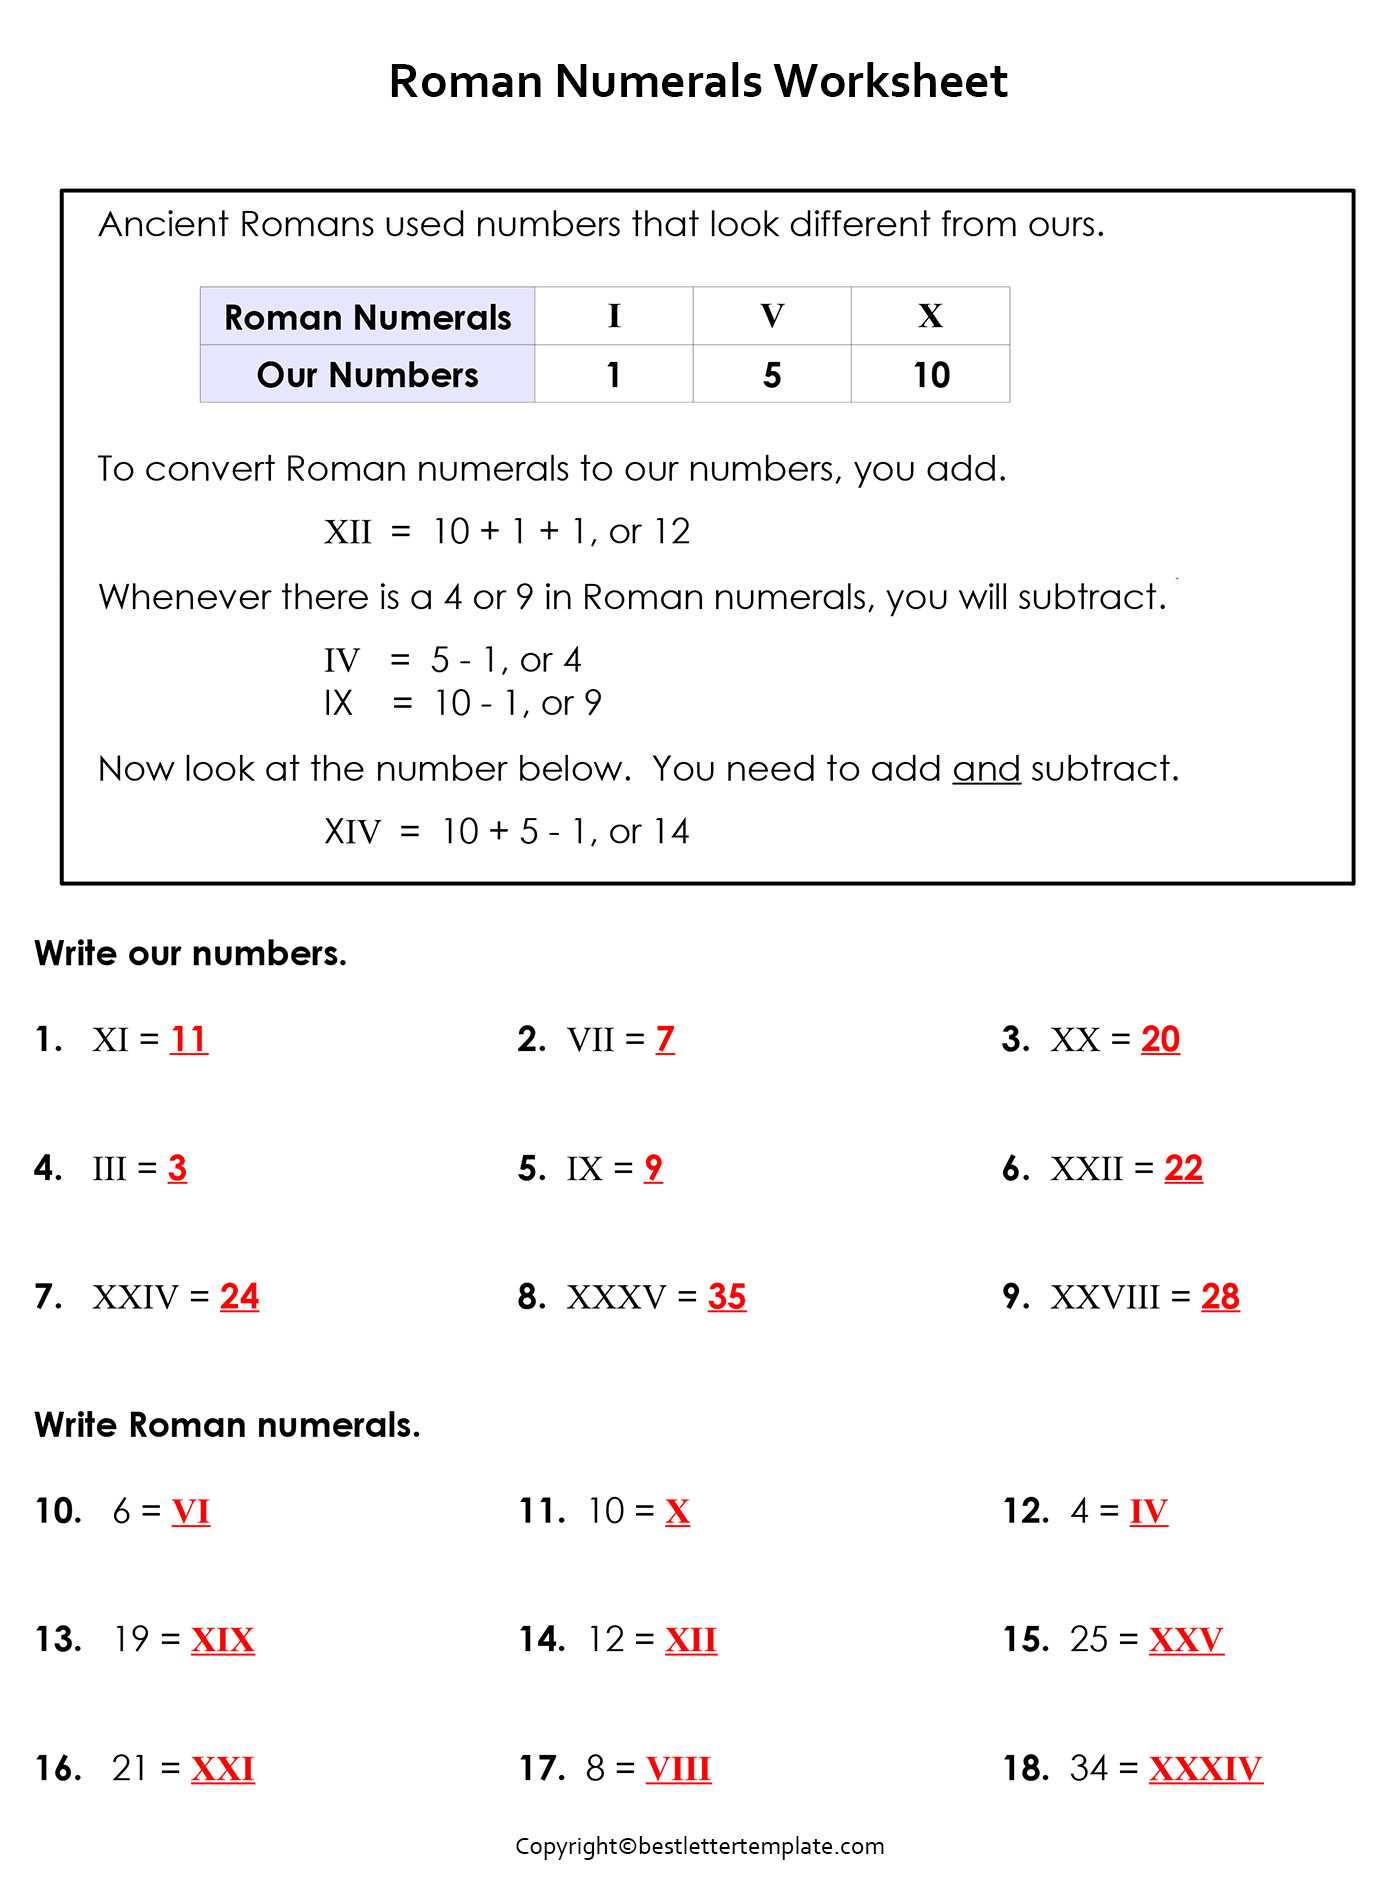 Roman Numerals Worksheet/Question and Answers